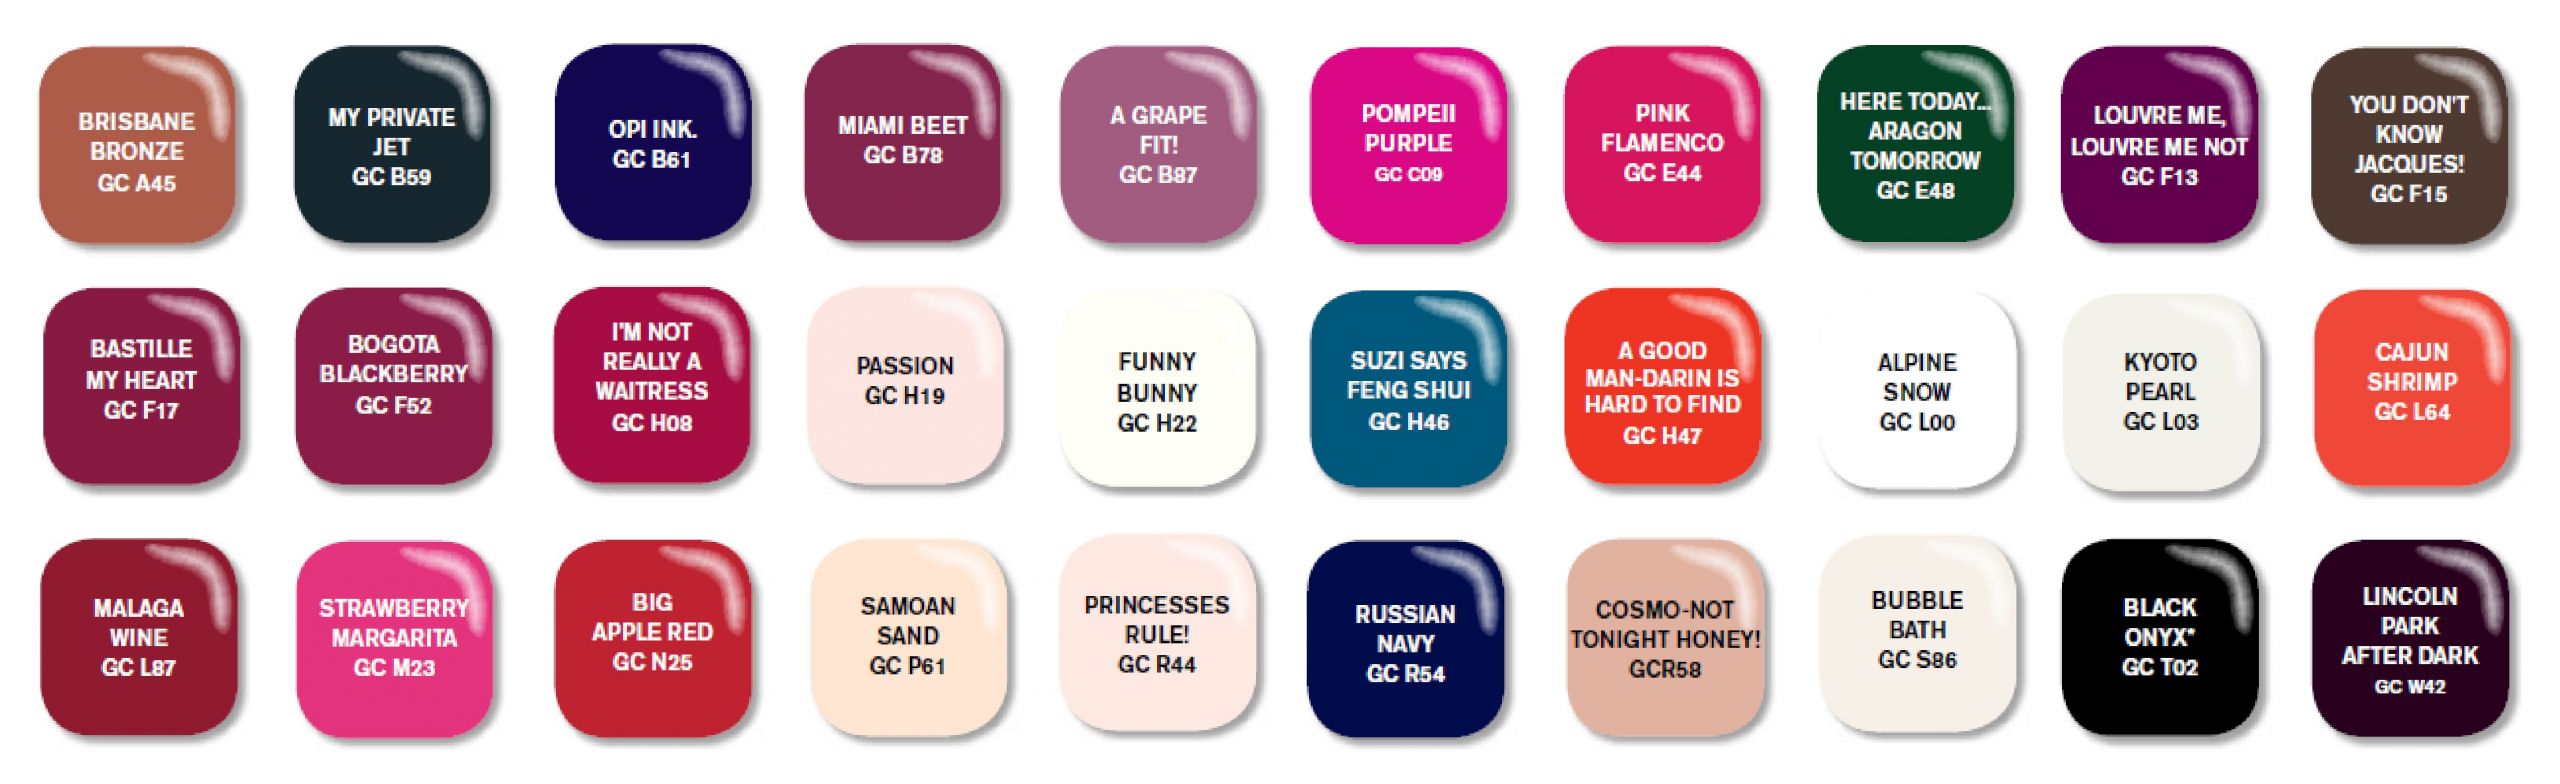 The Best Opi Gel Nail Colors Chart Home, Family, Style and Art Ideas